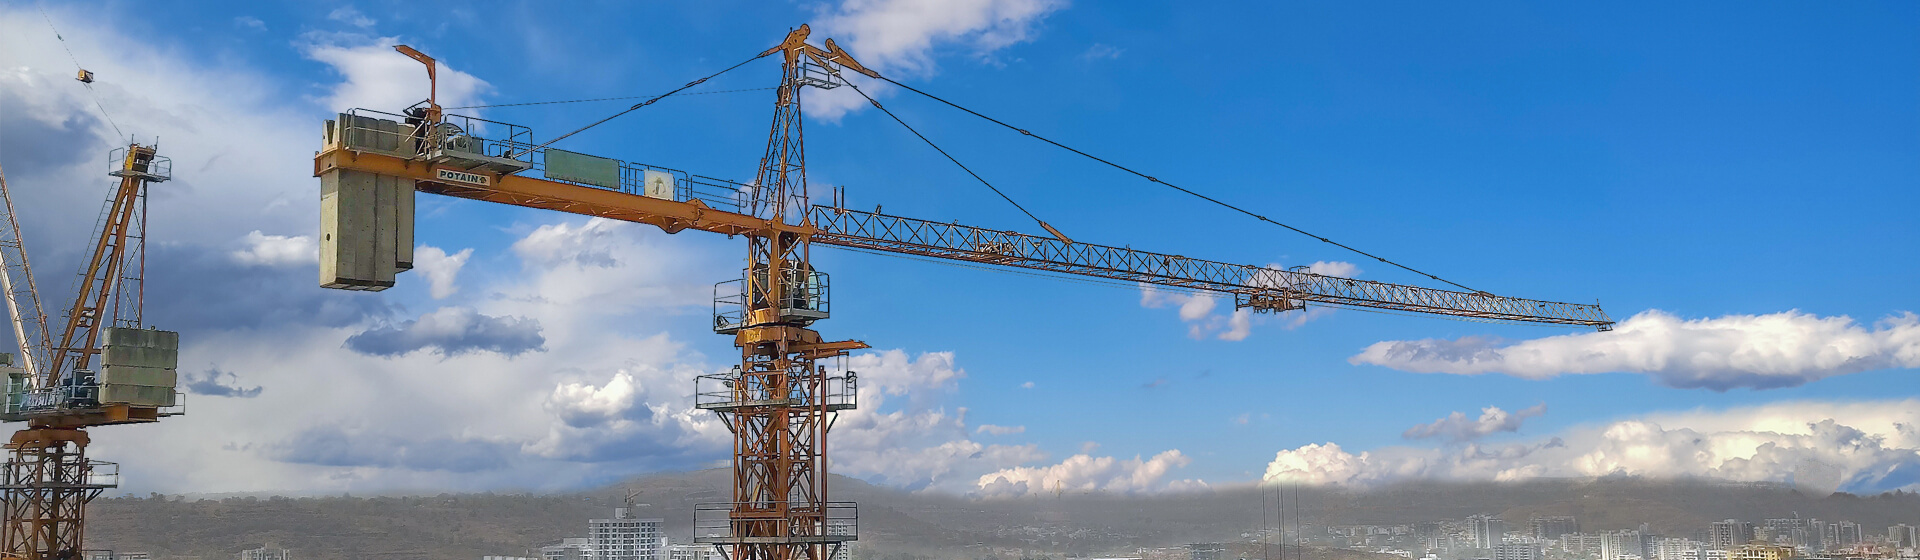 SJ-Contracts-puts-its-faith-in-Potain-tower-cranes-1.jpg